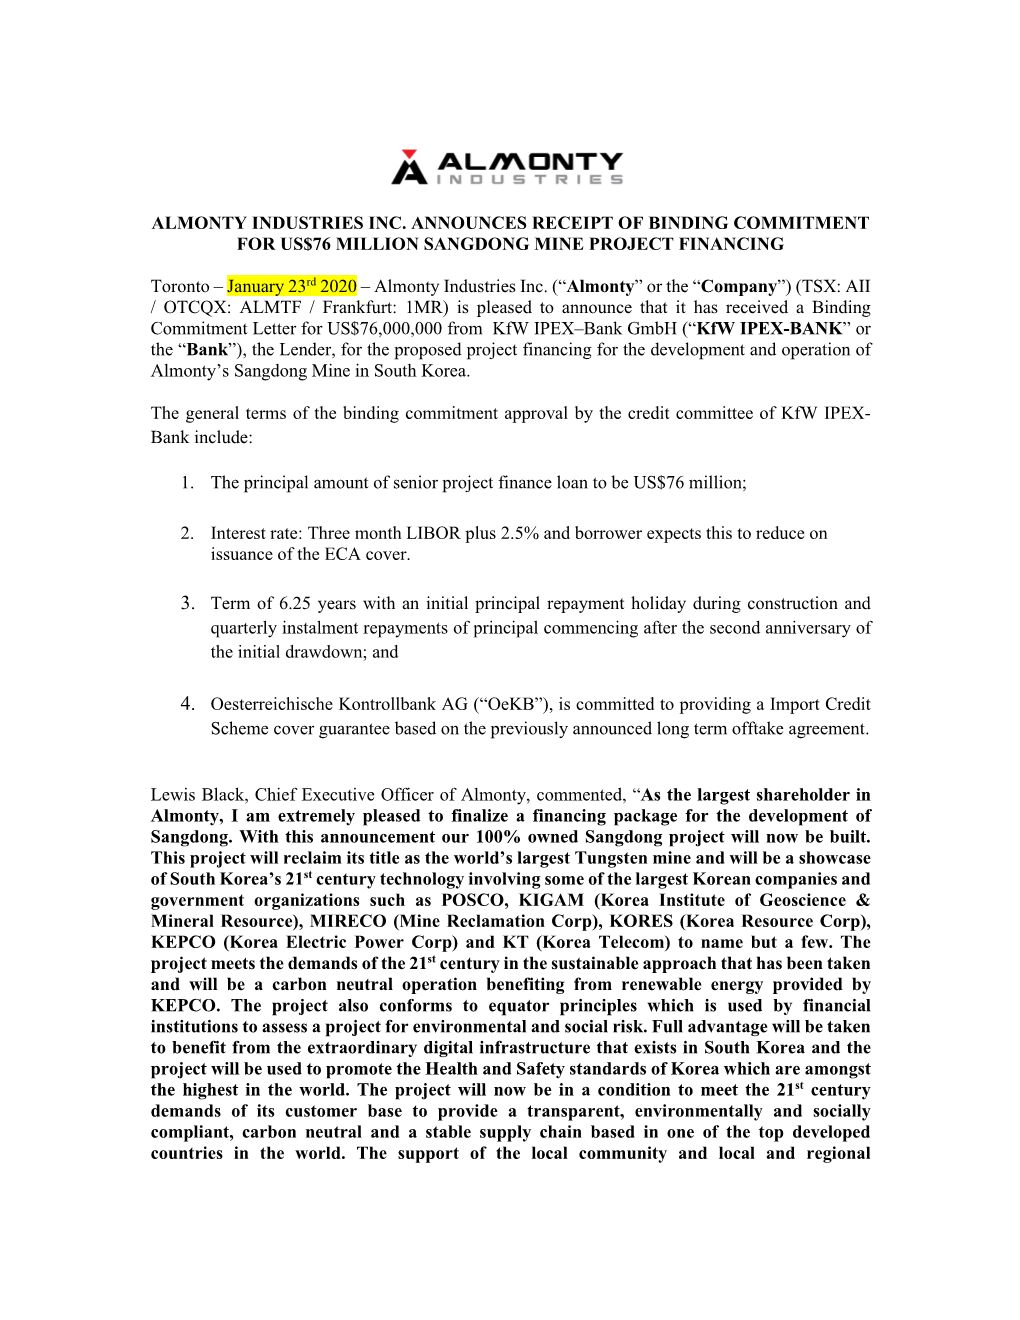 Almonty Industries Inc. Announces Receipt of Binding Commitment for Us$76 Million Sangdong Mine Project Financing